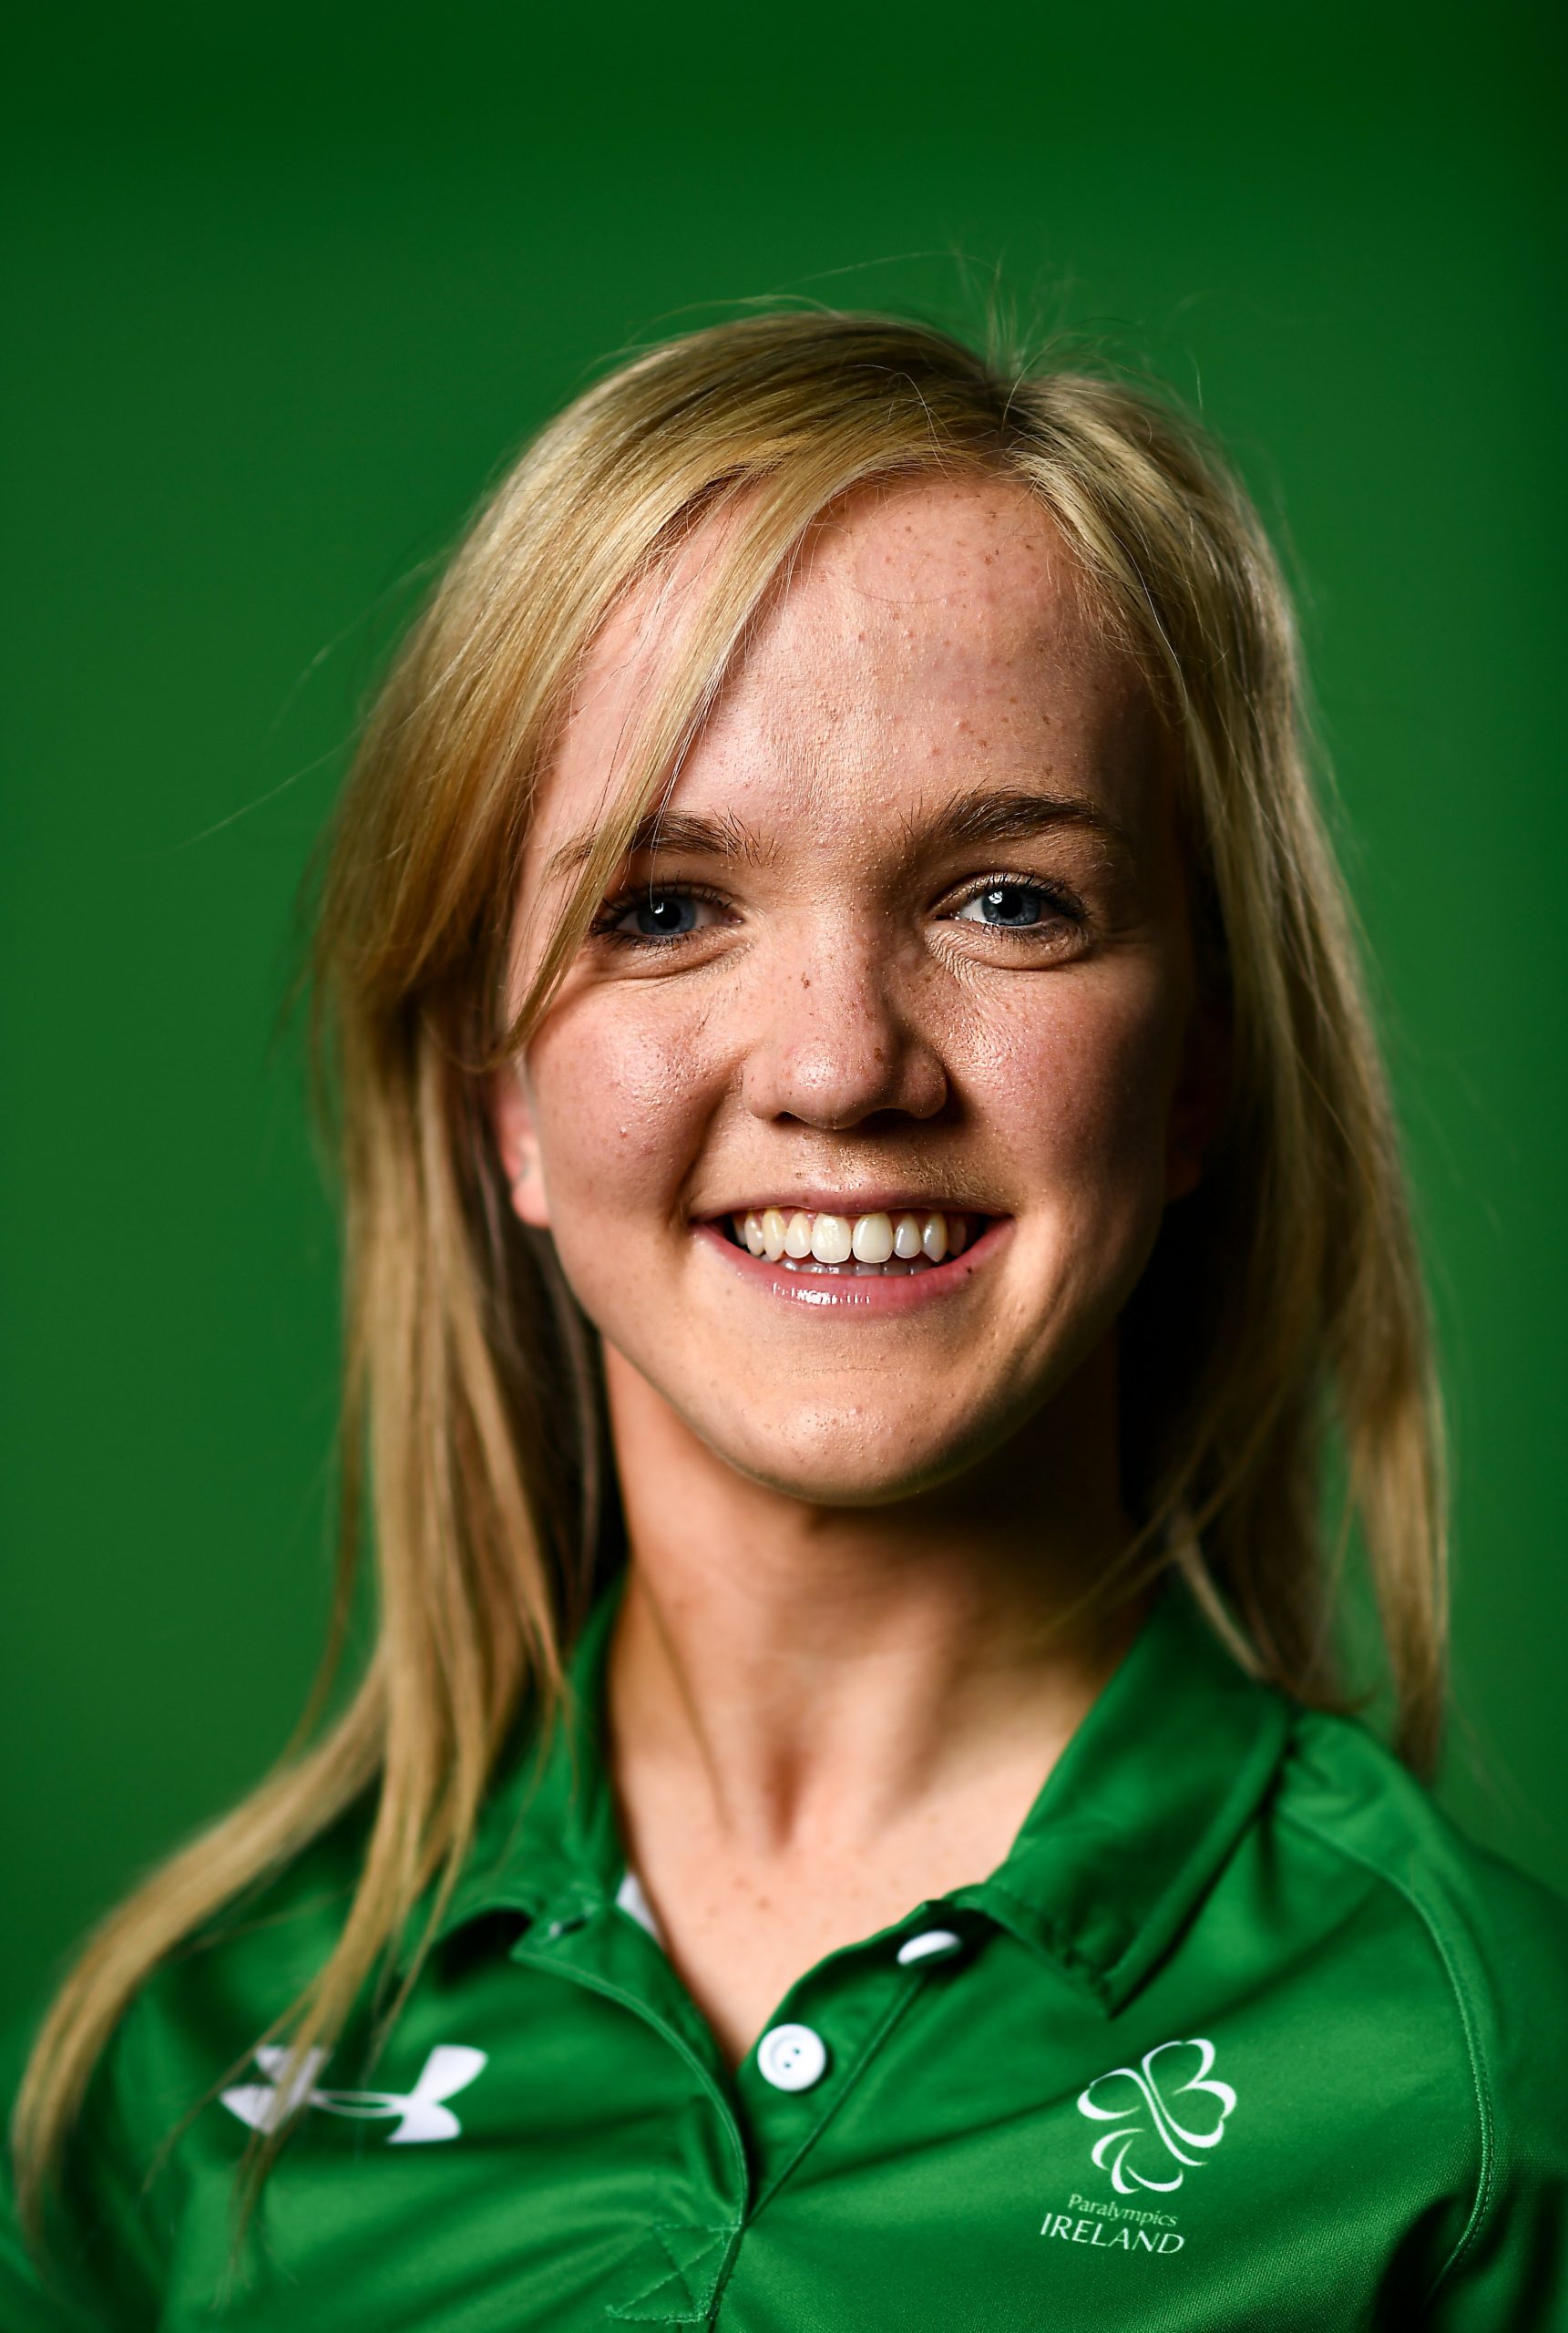 9 August 2021; Paralympics Ireland have announced the 8 Athletes that will represent Team Ireland in Athletics. The team includes Jason Smyth, Michael McKillop, Patrick Monahan, Orla Comerford, Niamh McCarthy, Mary Fitzgerald and Jordan Lee. Pictured at the announcement is Mary Fitzgerald. Photo by David Fitzgerald/Sportsfile *** NO REPRODUCTION FEE ***